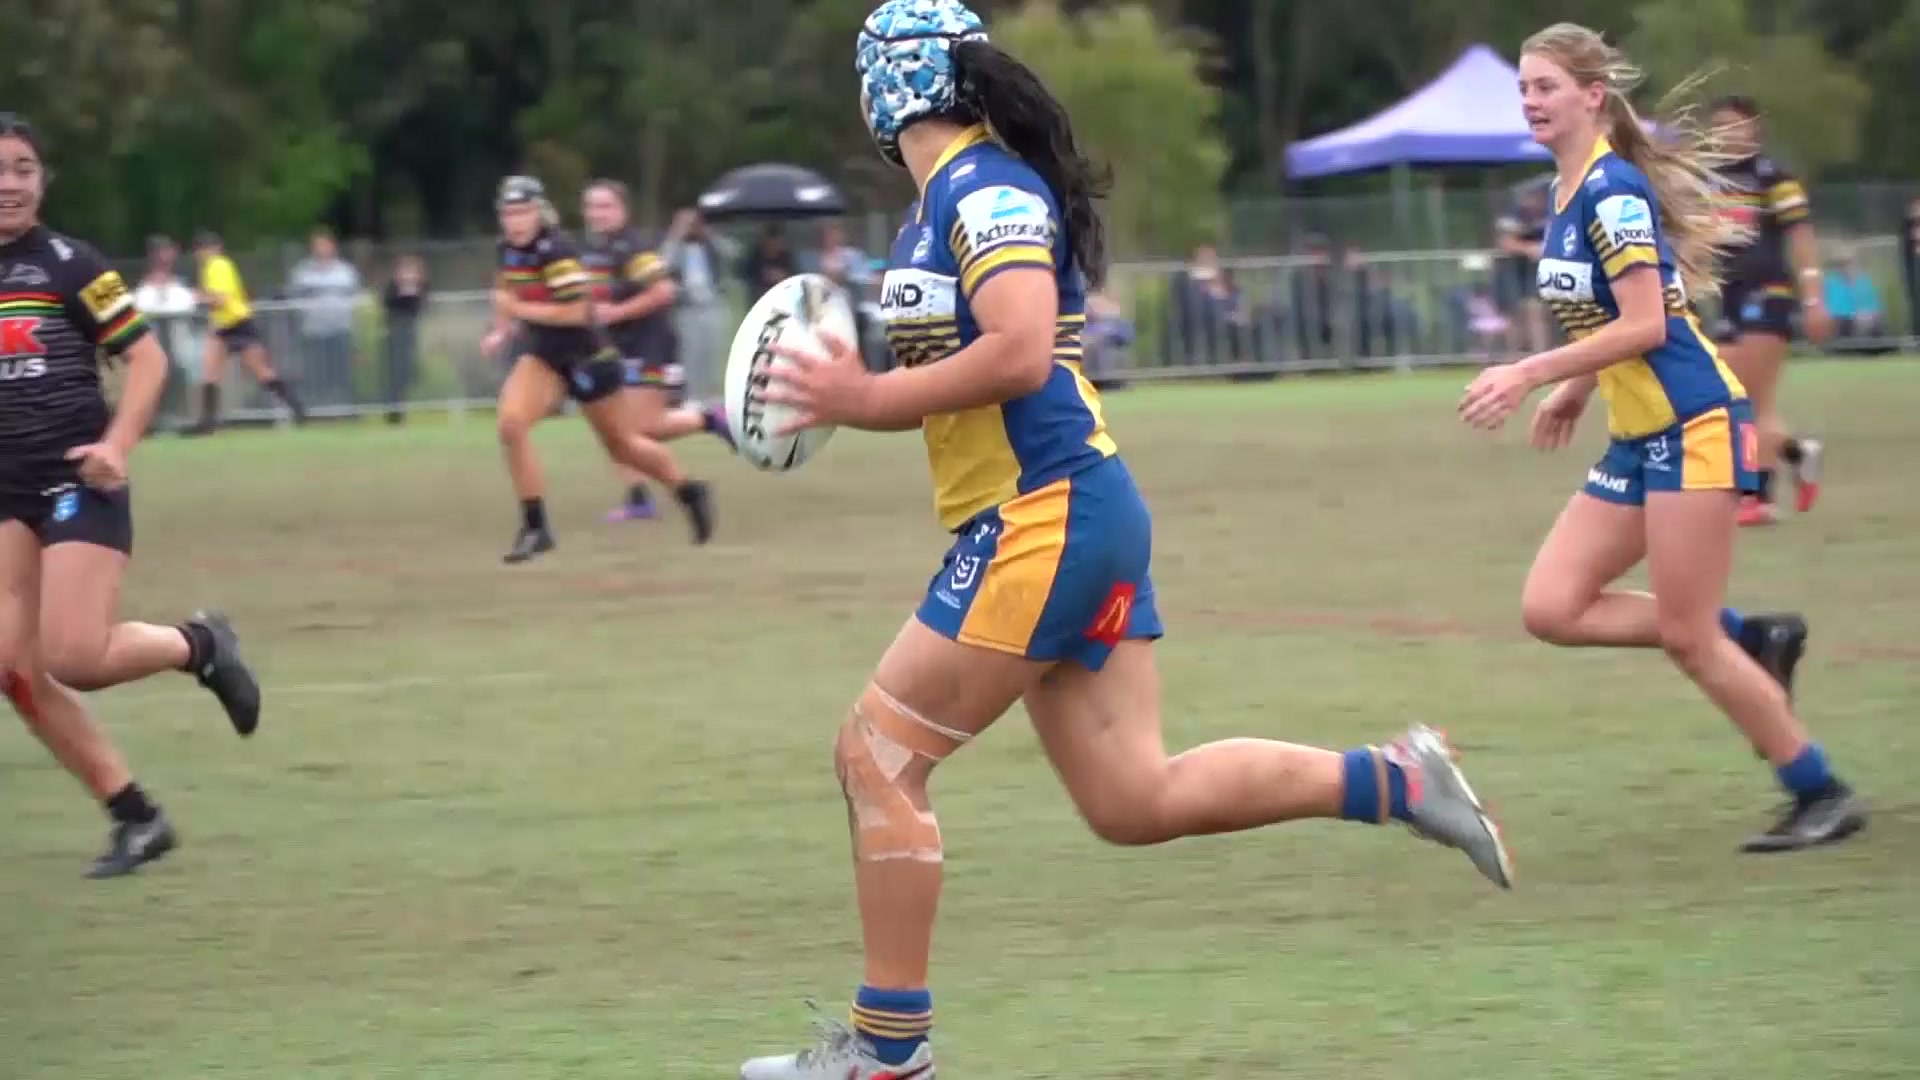 New pathways for female rugby league players